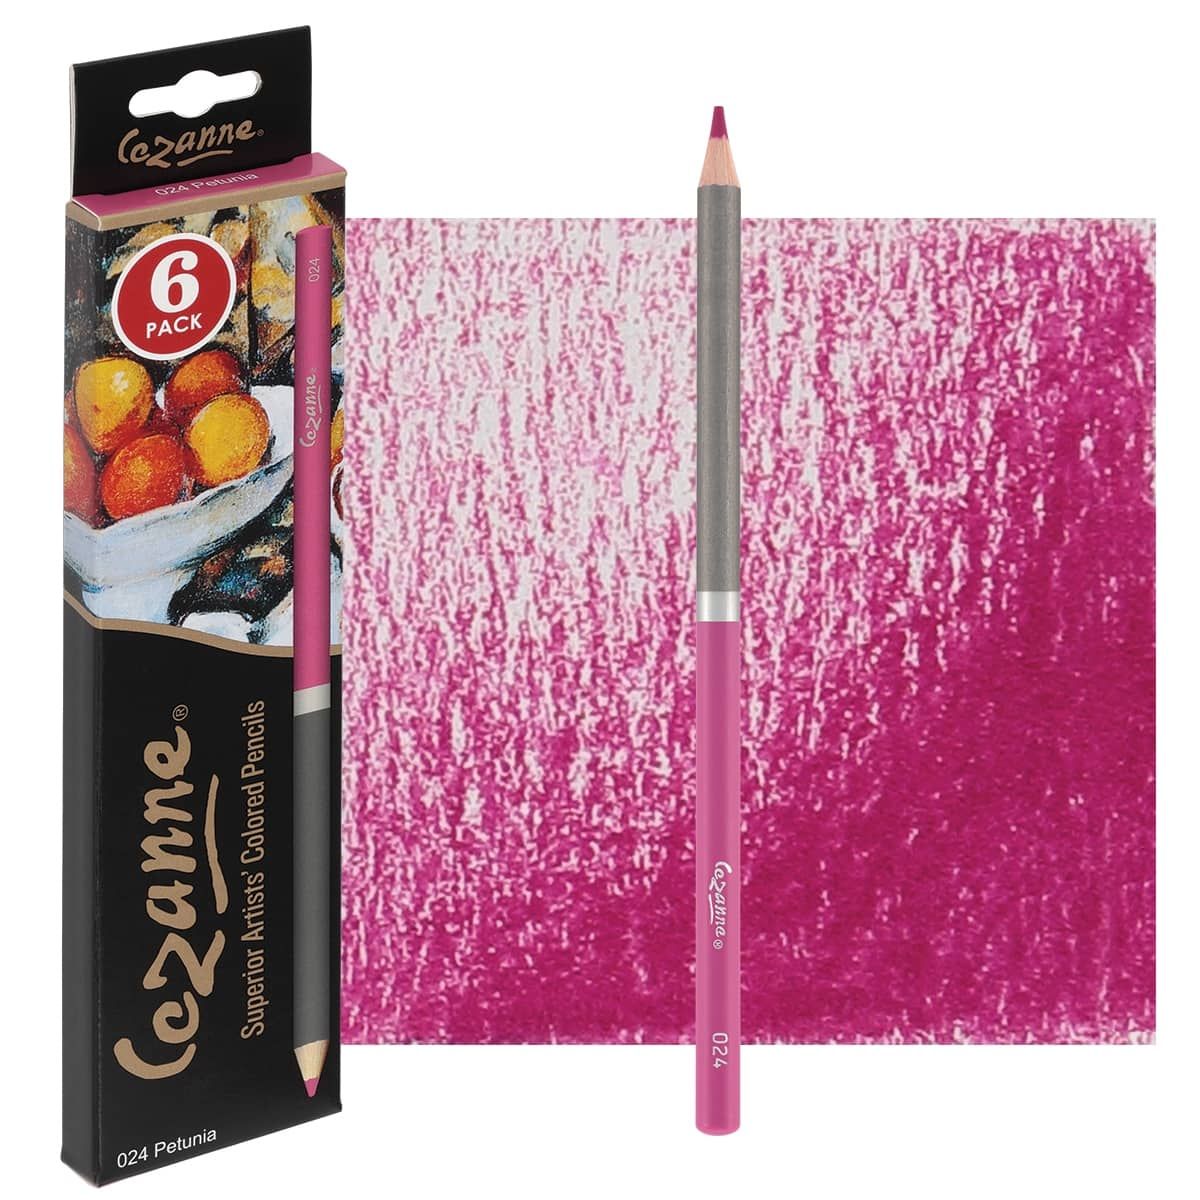 Colors release easily onto paper, board, or canvas